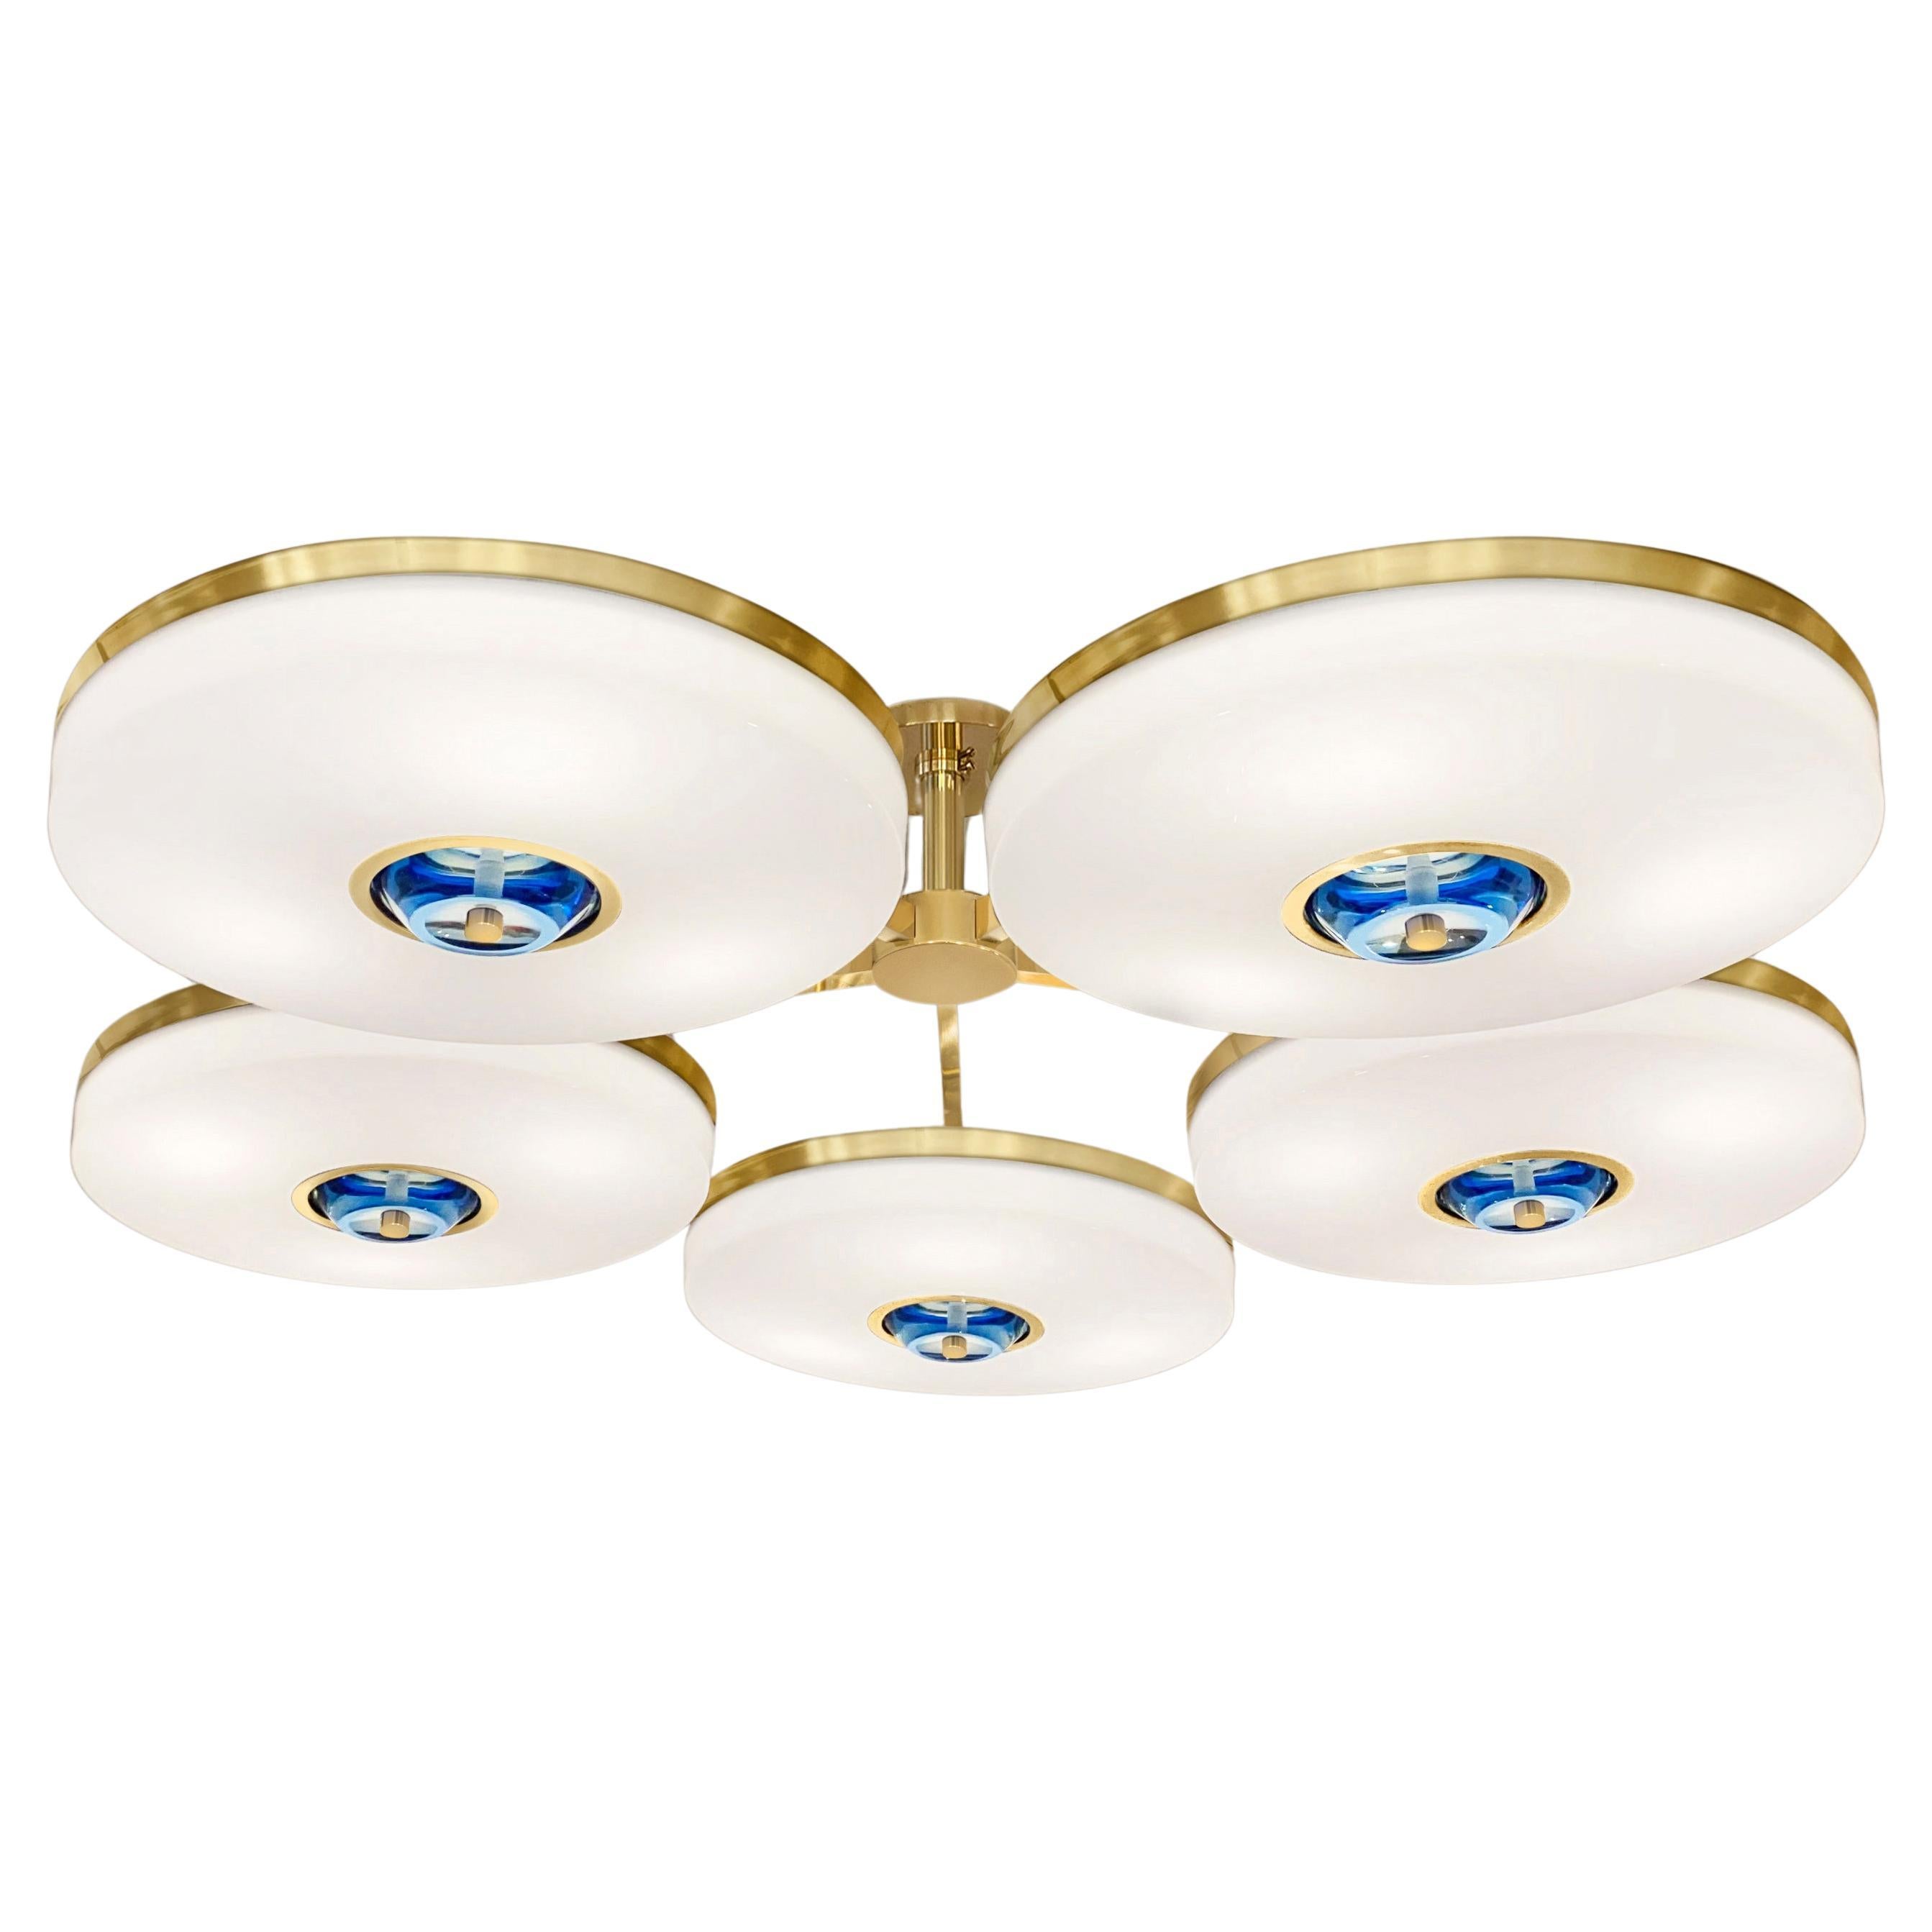 Iris N. 5 Ceiling Light by Gaspare Asaro - Polished Brass Finish For Sale